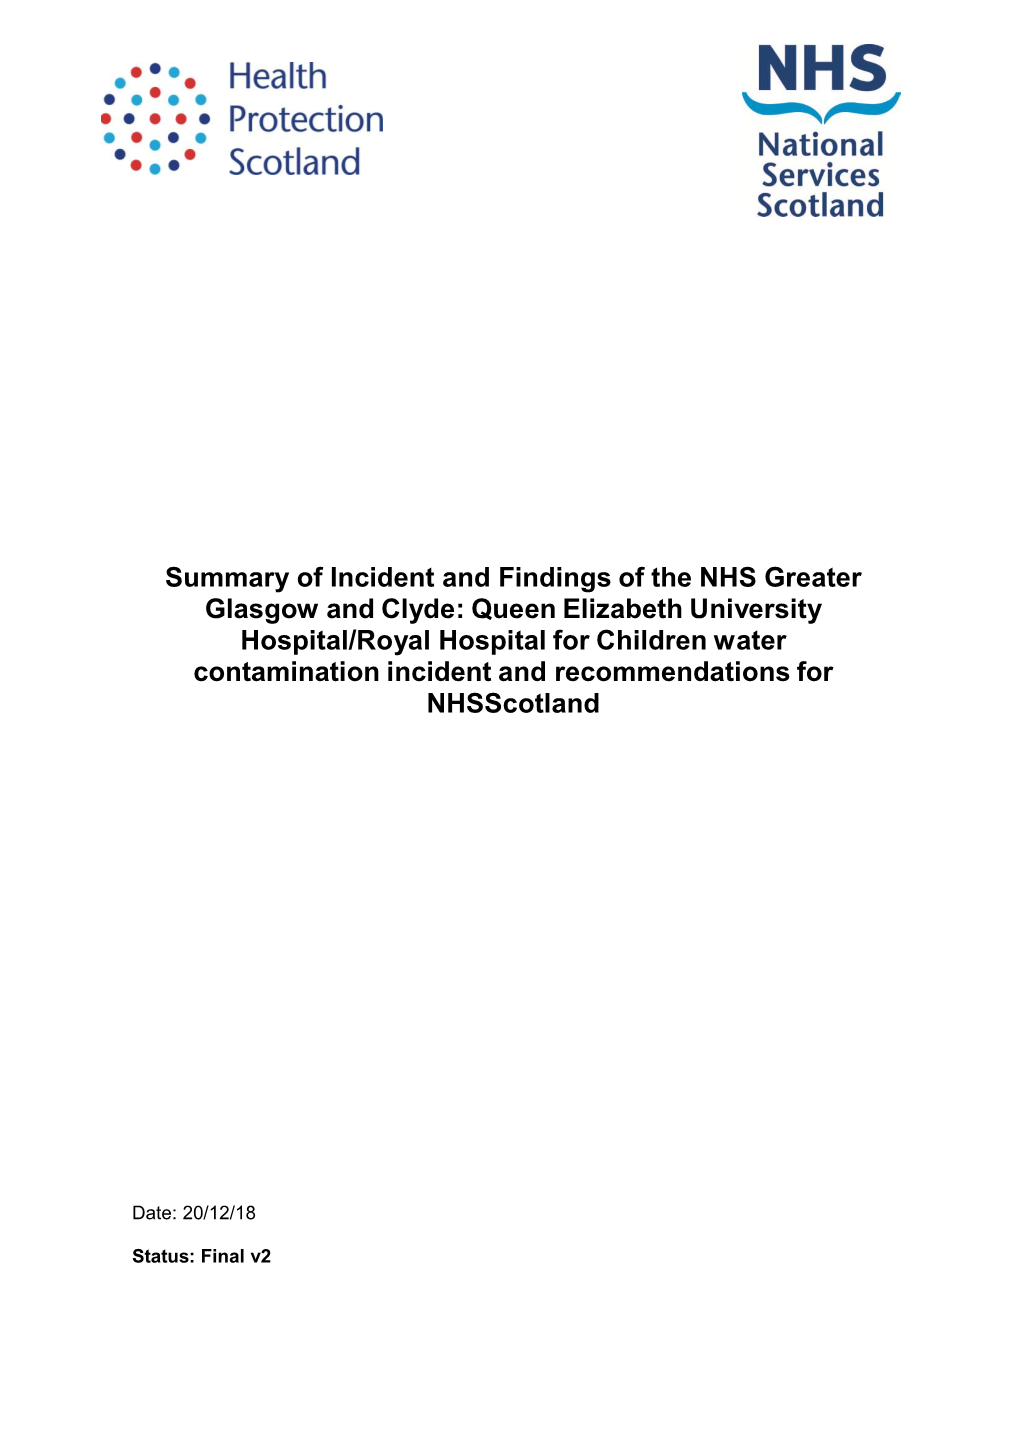 Summary of Incident and Findings of the NHS Greater Glasgow And